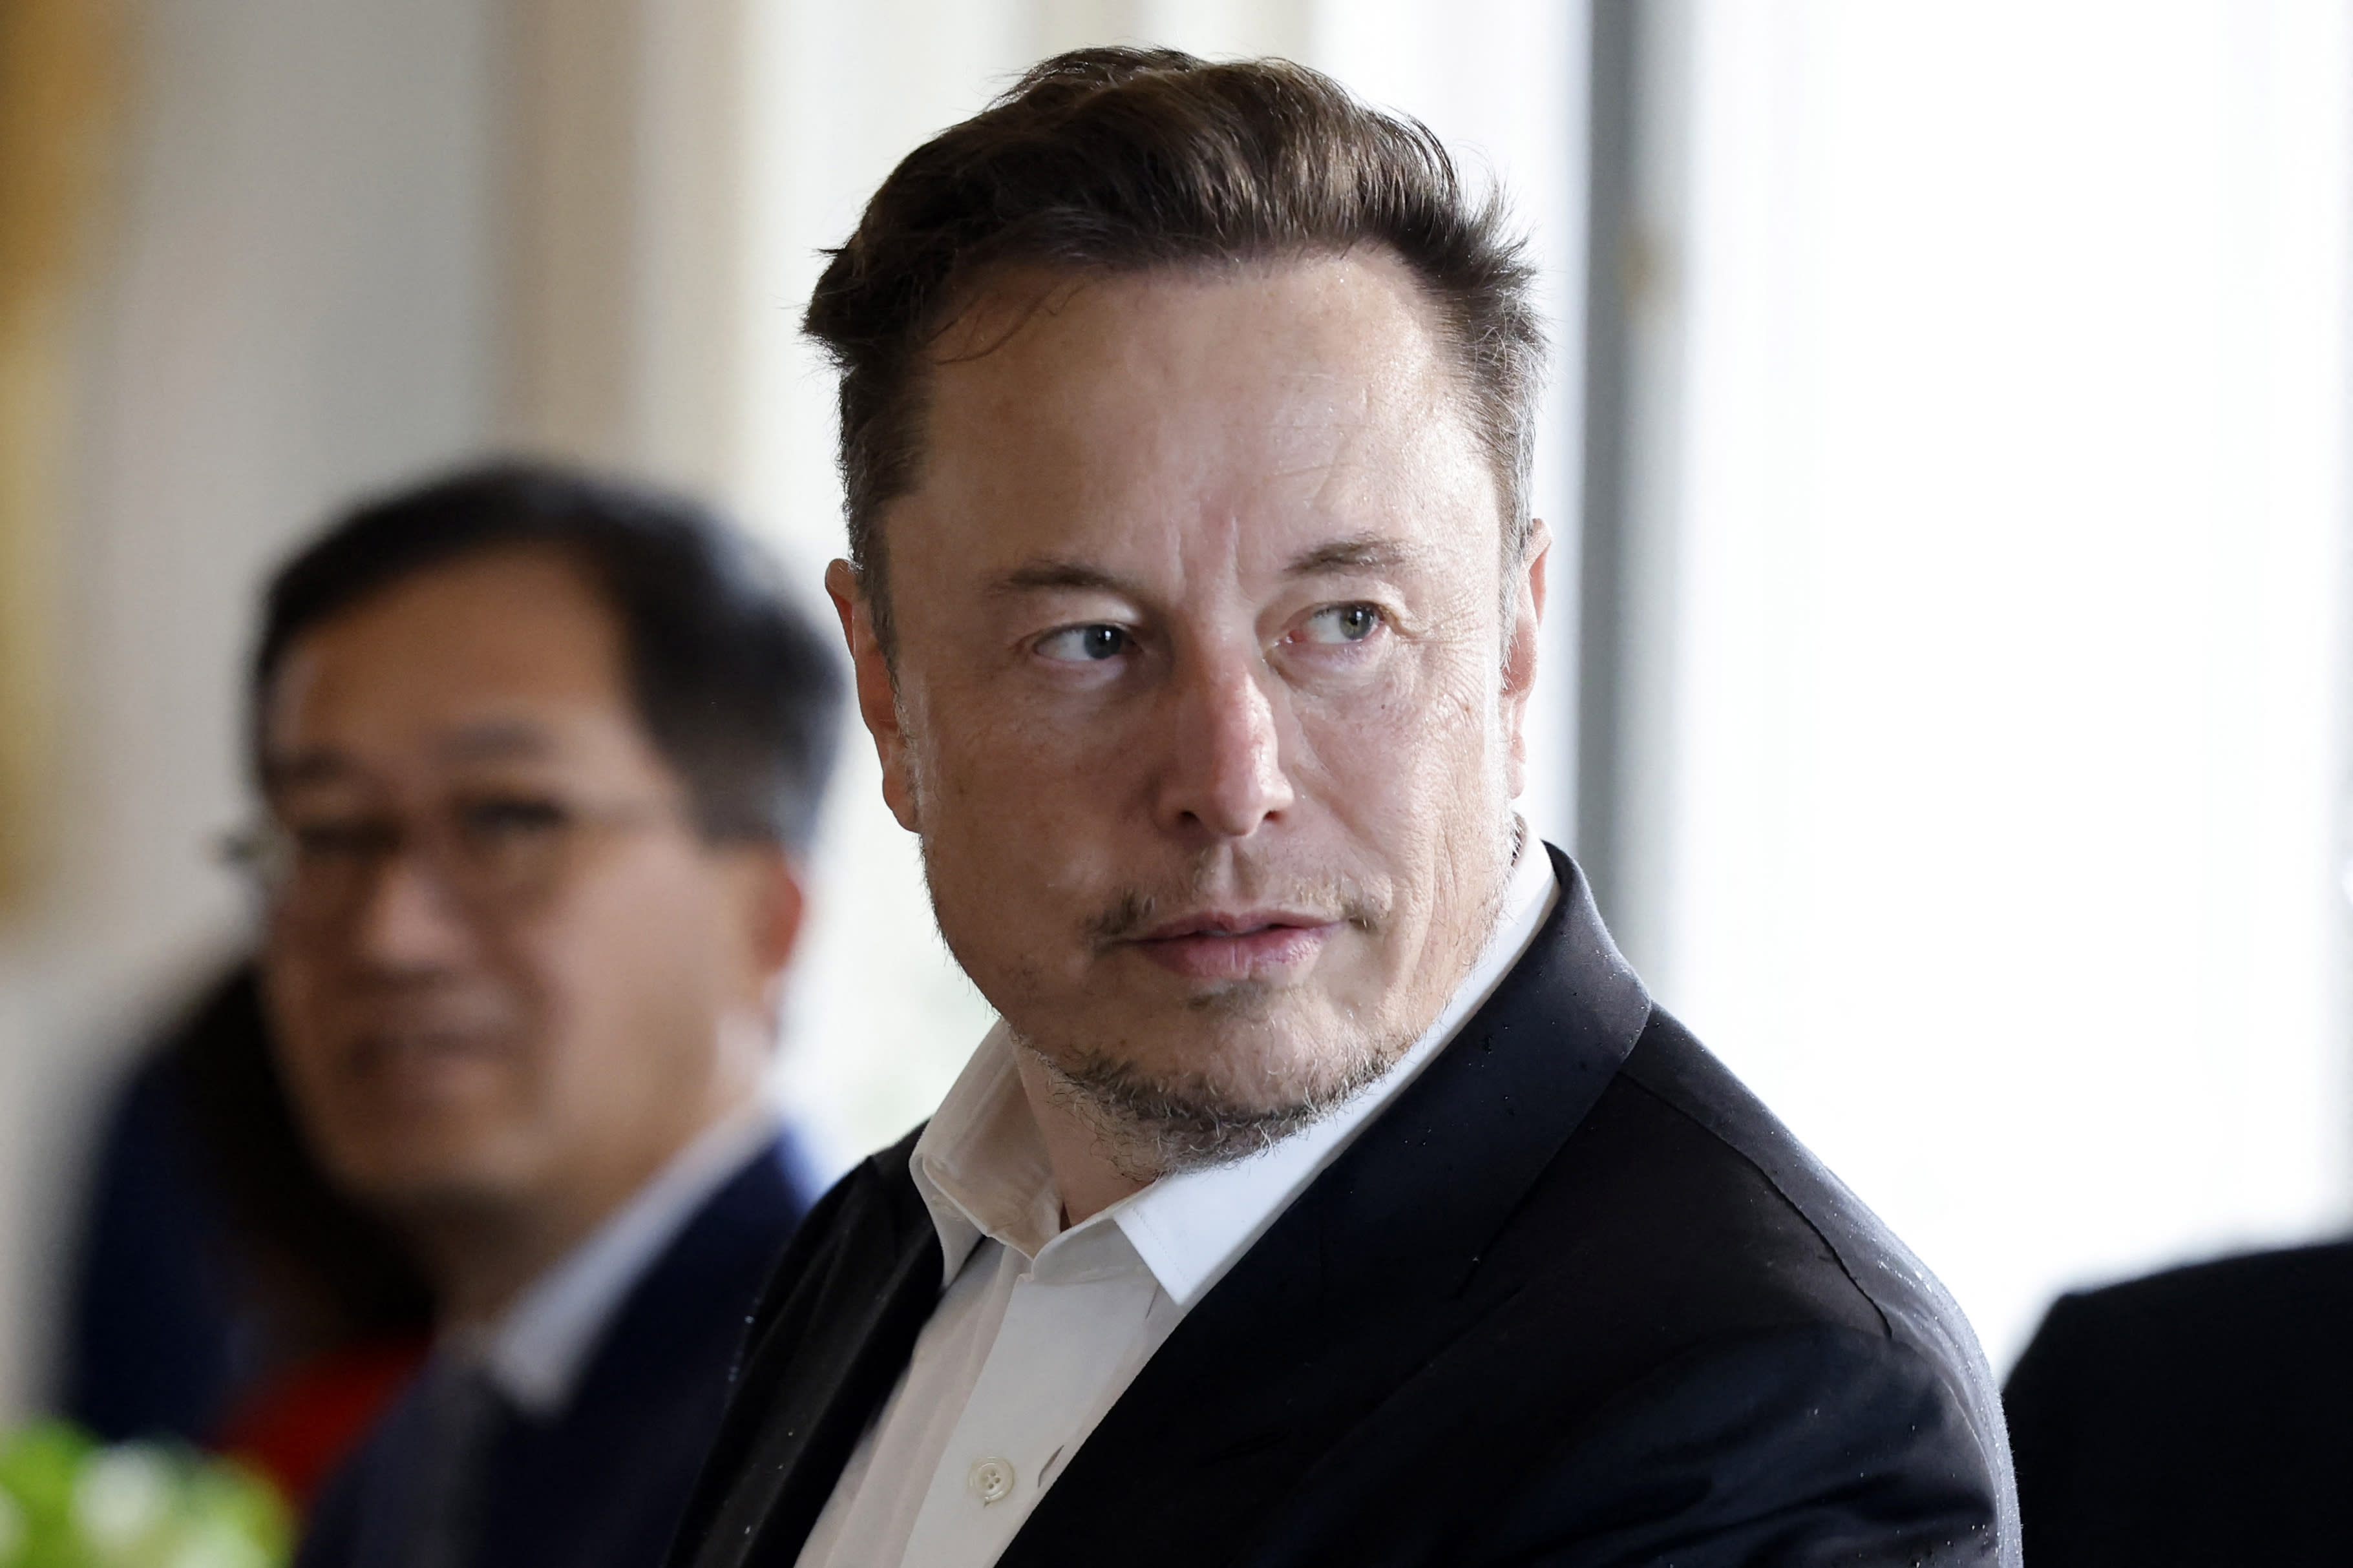 Elon Musk claims he is the reason ChatGPT owner OpenAI exists